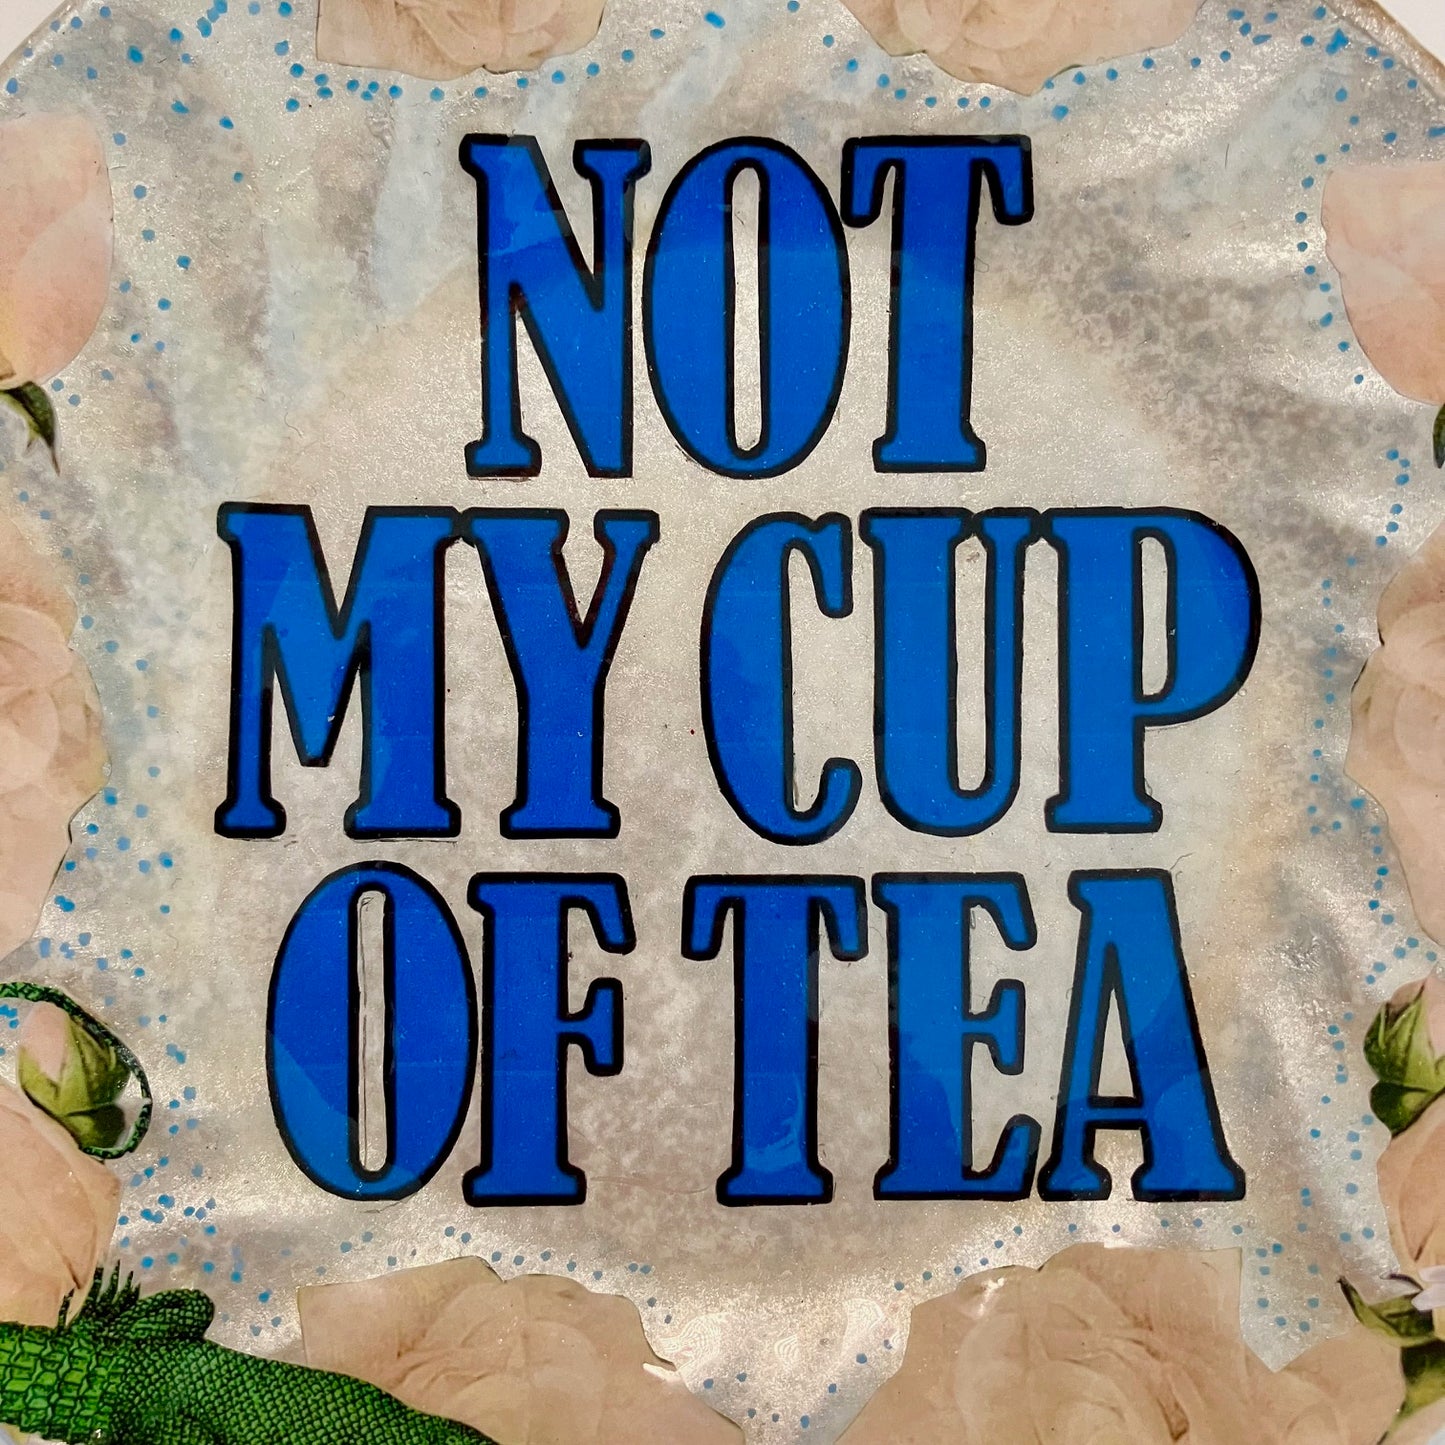 Cream Upcycled Wall Plate "Not My Cup Of Tea" - by House of Frisson